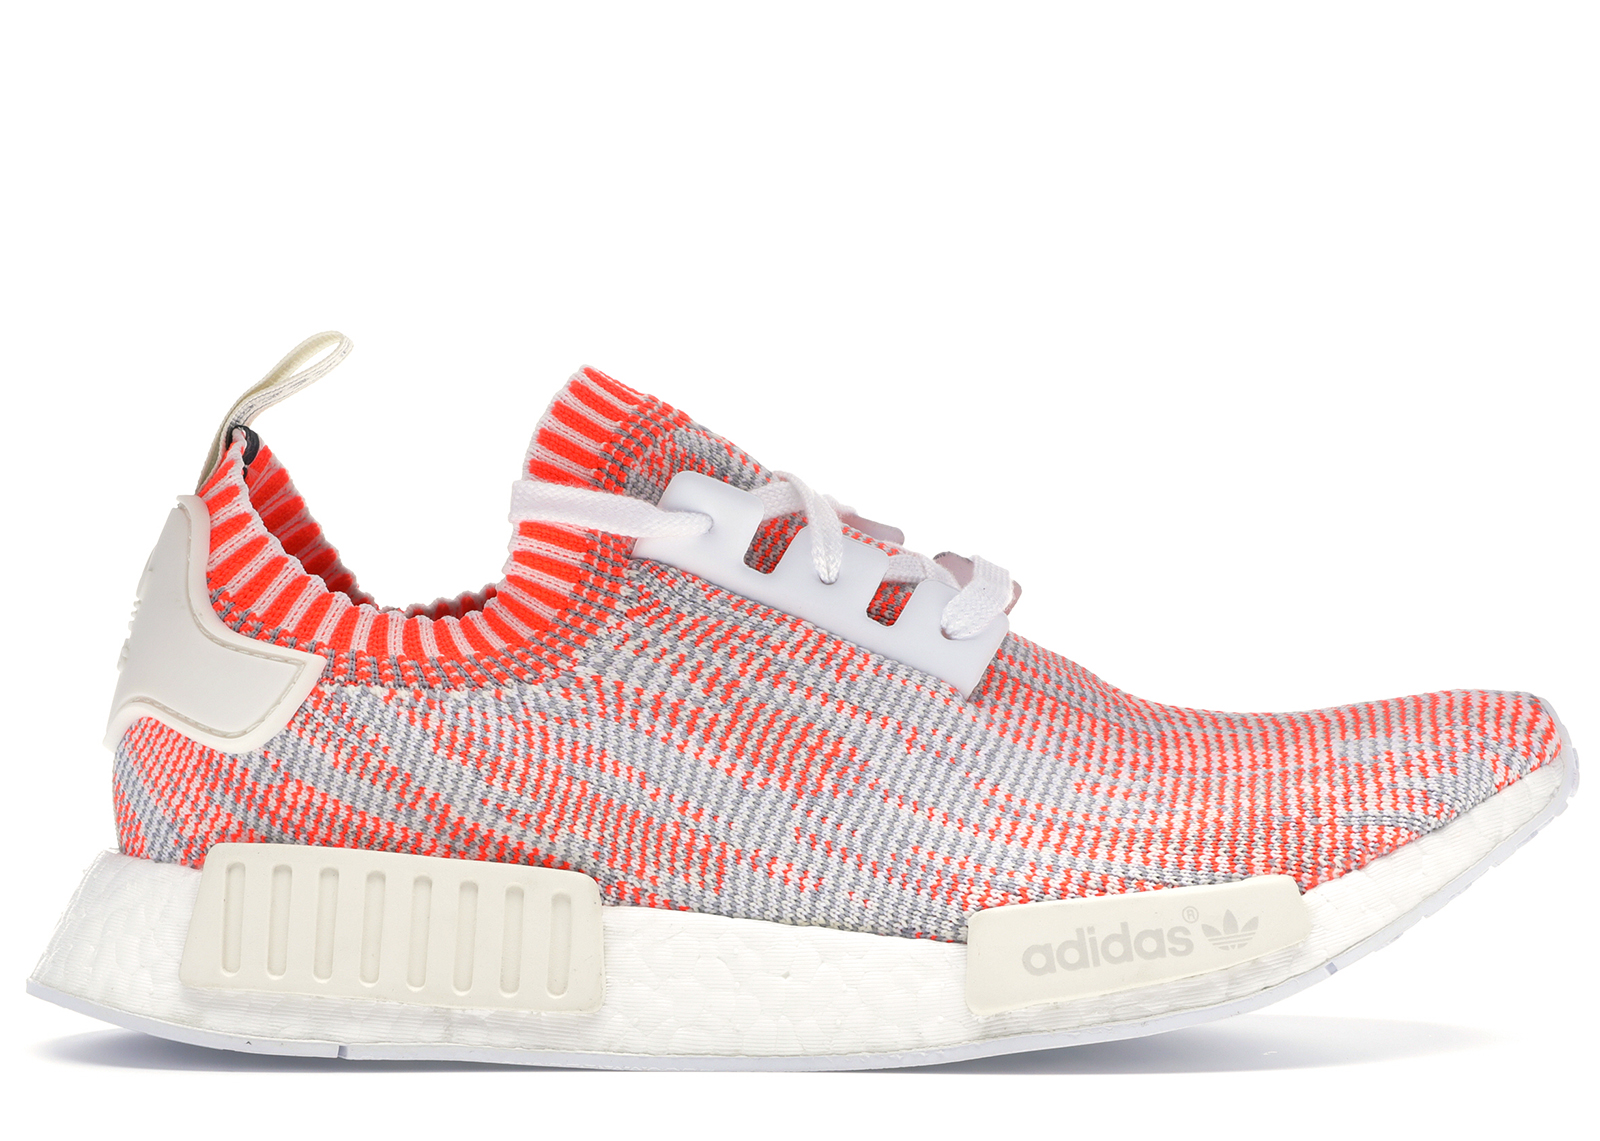 nmd red camo